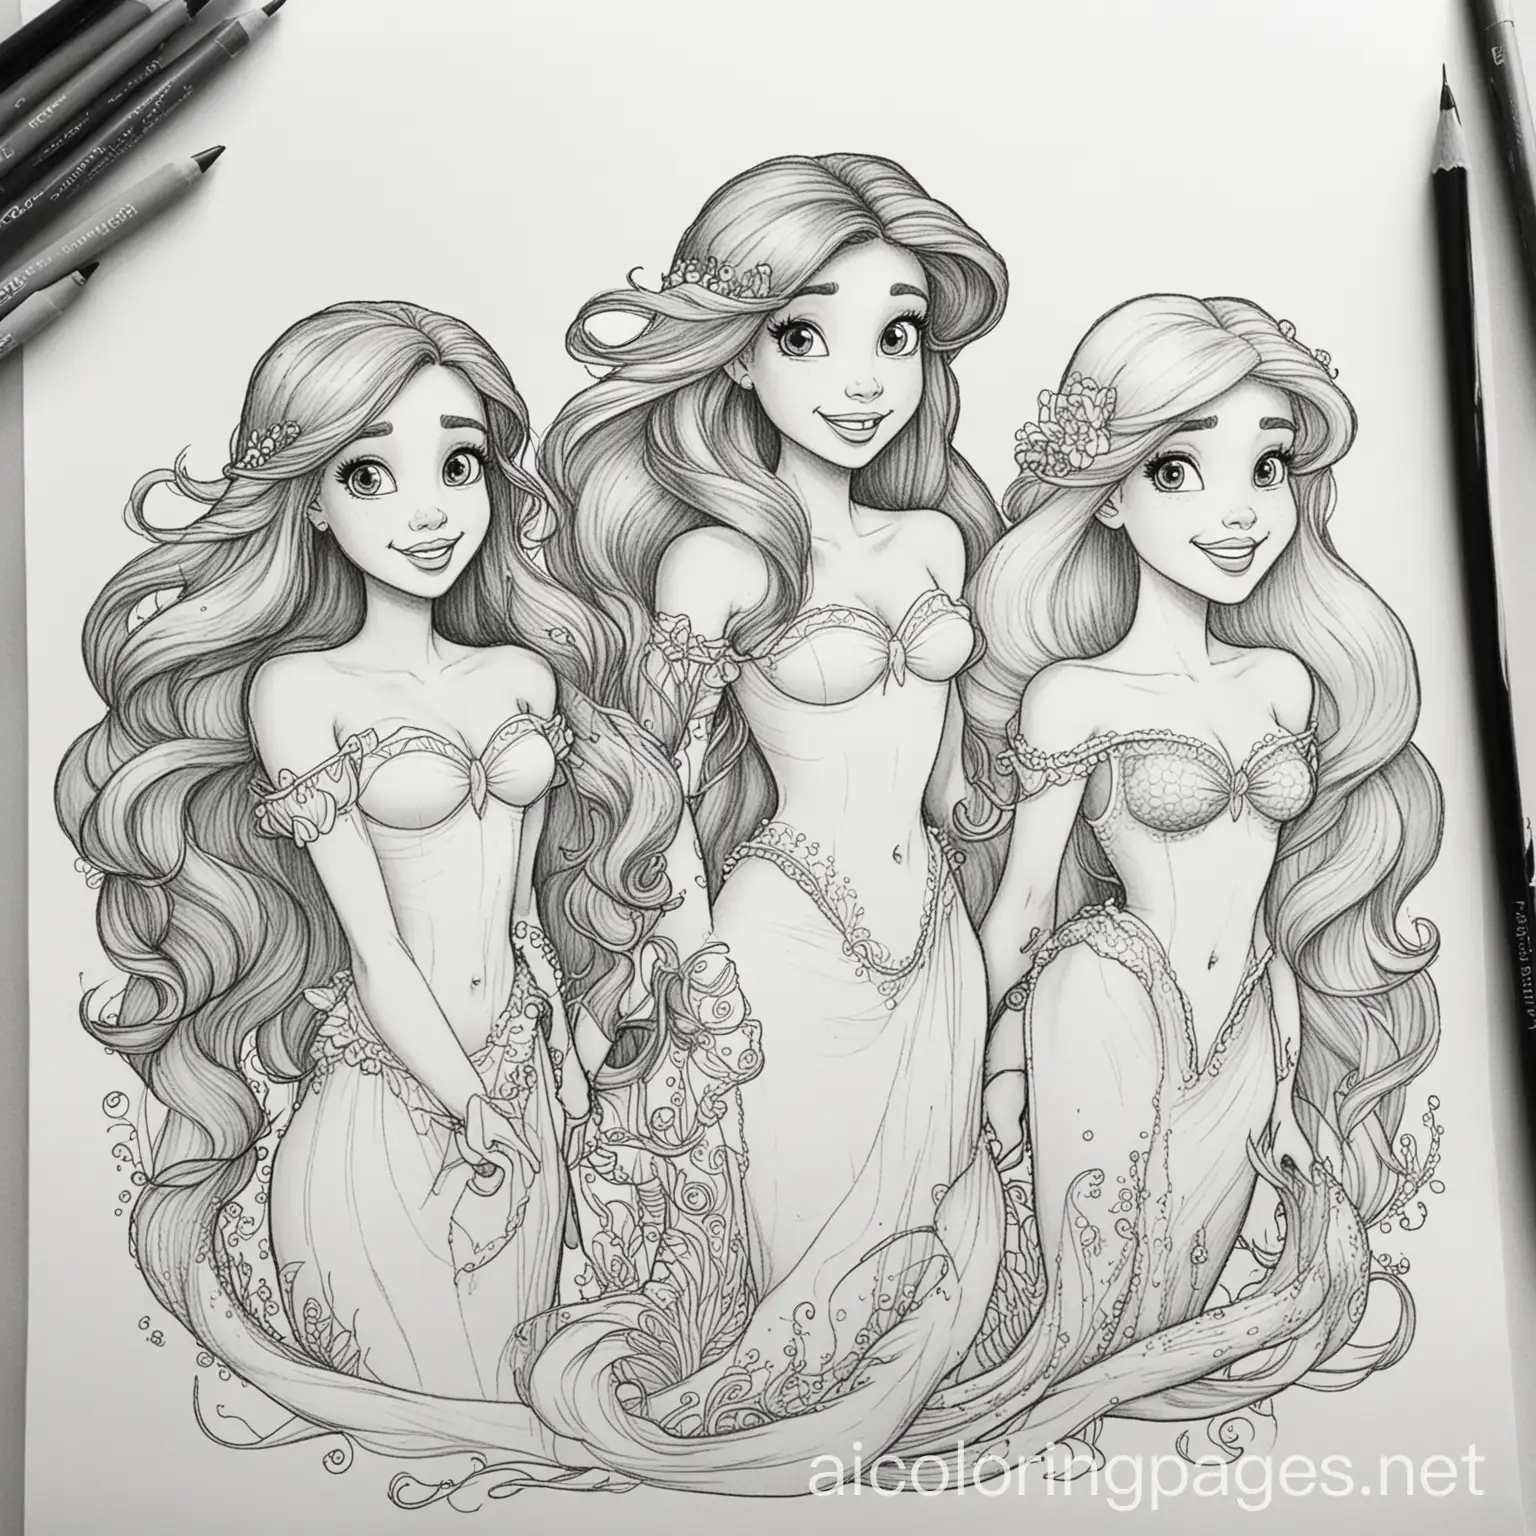 Ariel, the little mermaid, and her sisters, Coloring Page, black and white, line art, white background, Simplicity, Ample White Space. The background of the coloring page is plain white to make it easy for young children to color within the lines. The outlines of all the subjects are easy to distinguish, making it simple for kids to color without too much difficulty